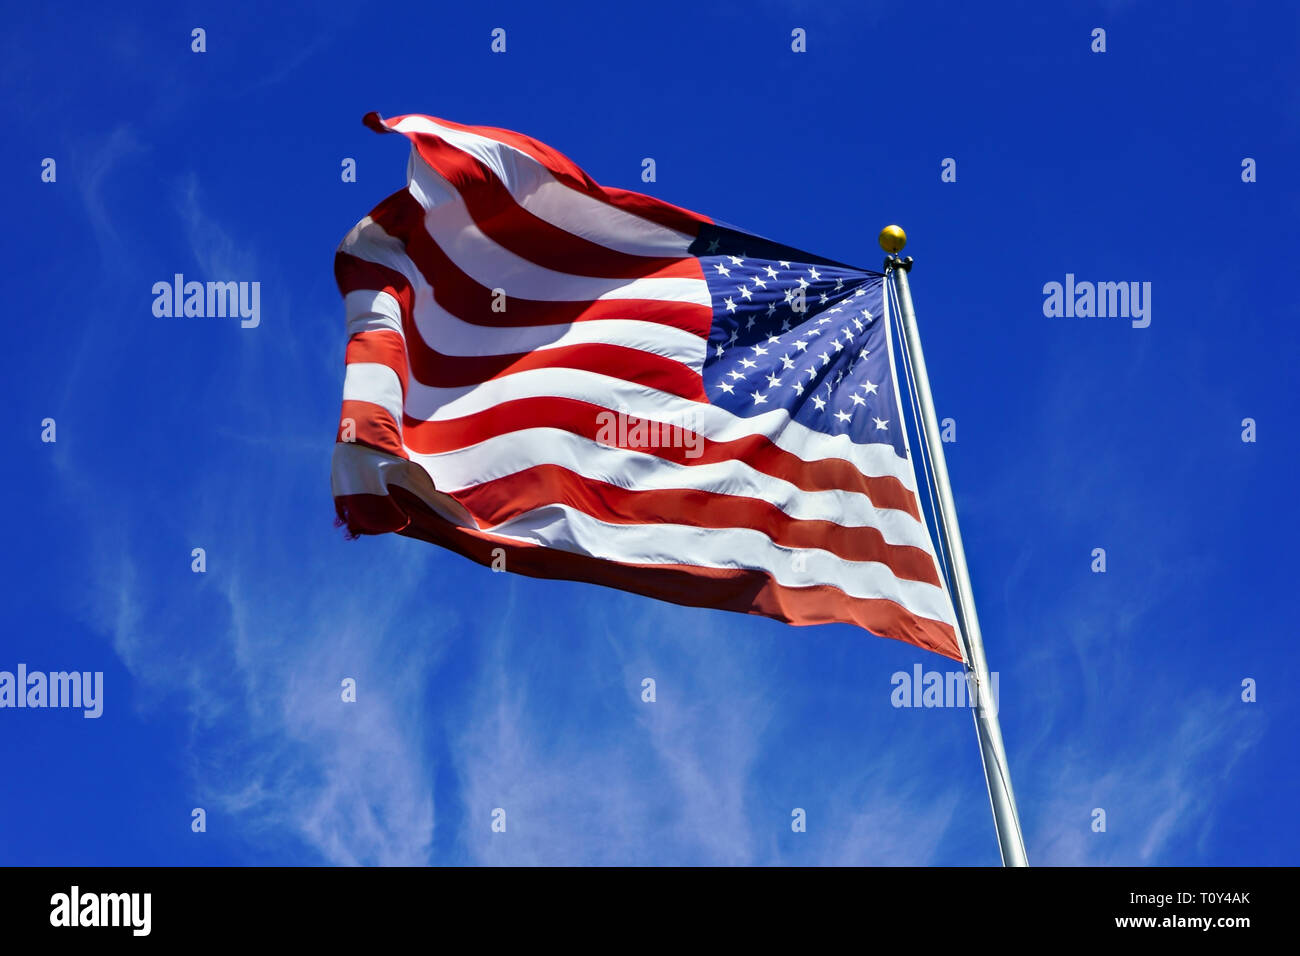 US flag, dynamically fluttering in the wind against a blue cloudy sky background. American flag with stars and stripes in strong colors. Stock Photo